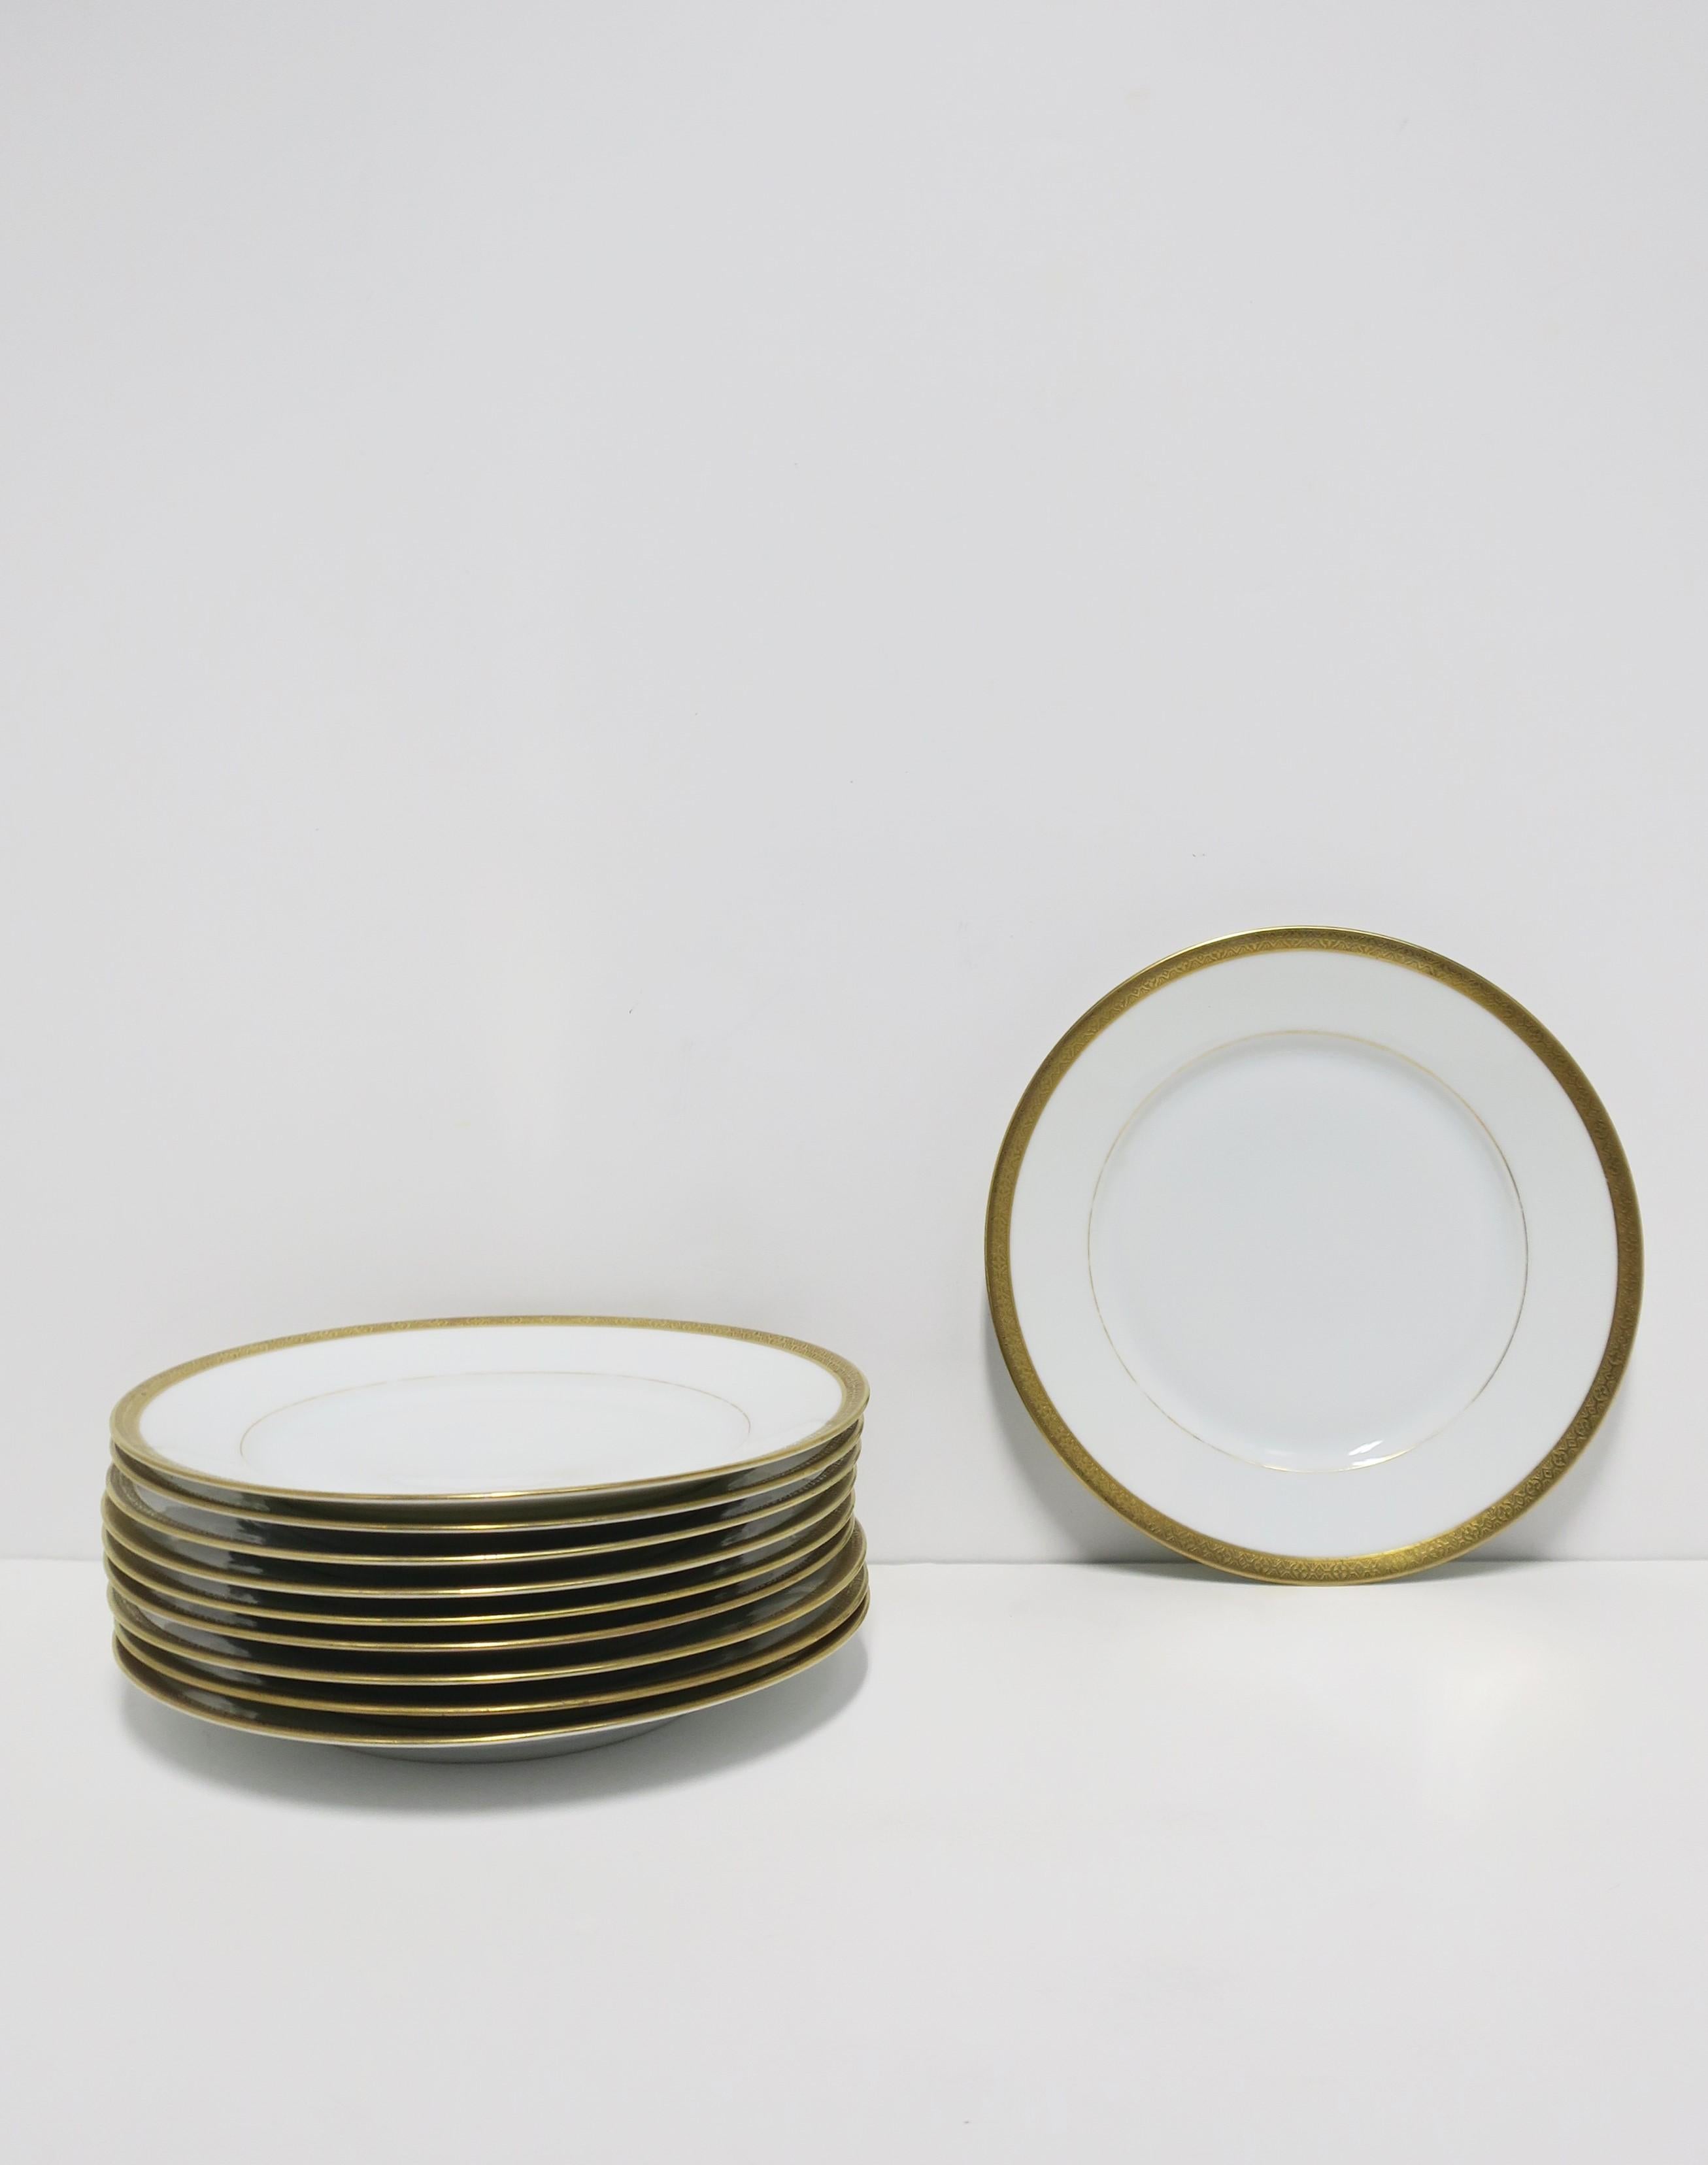 A beautiful vintage set of ten (10) white and gold porcelain plates, circa early to mid-20th century, Austria. Plates have a beautiful gold relief band around edge. Made in Austria as marked on underside of all as shown. A great set of plates to mix